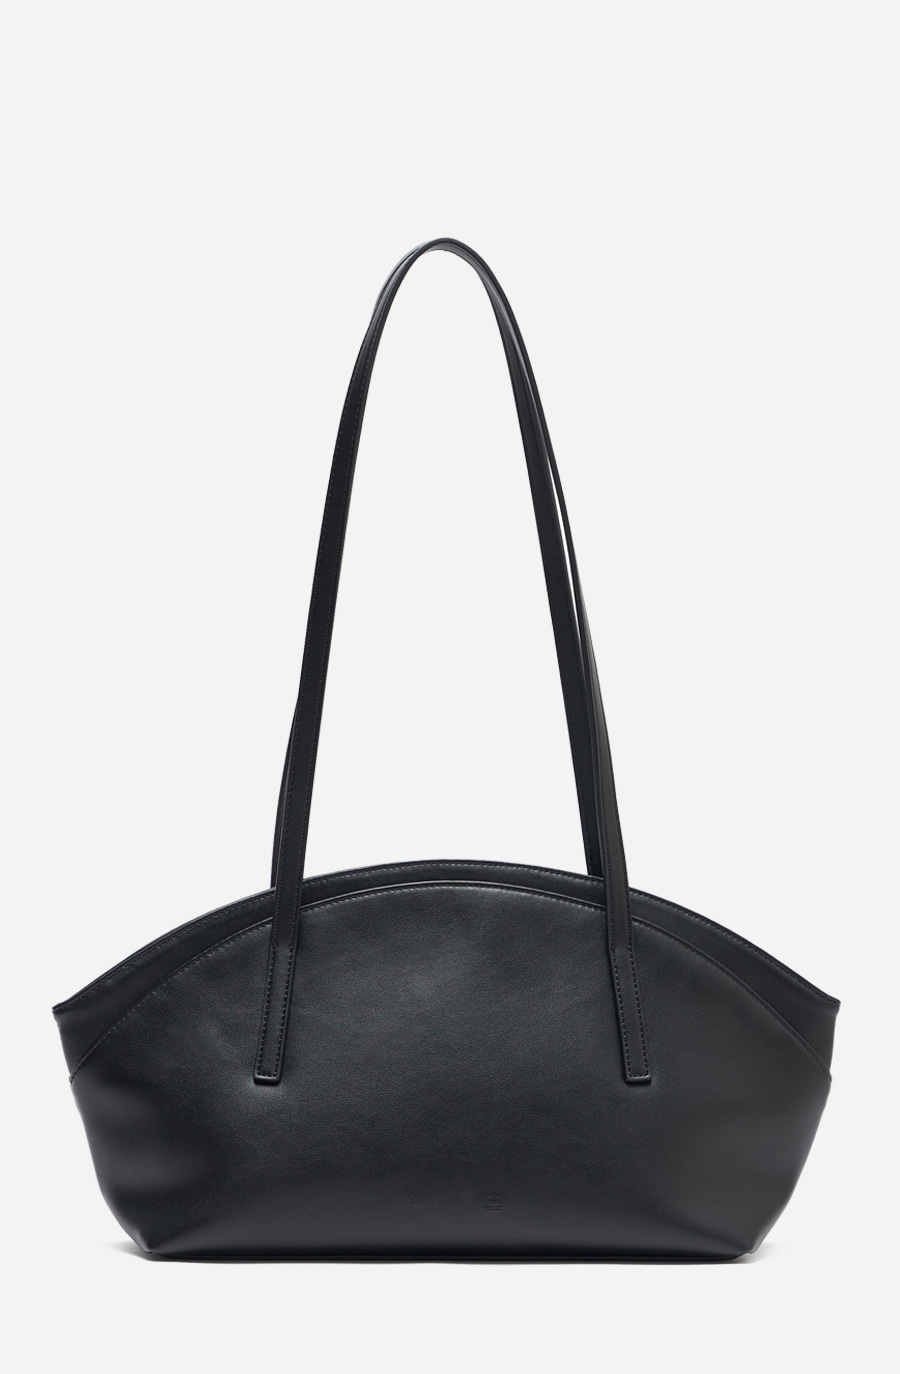 SMALL CLAM BAG (solid black)